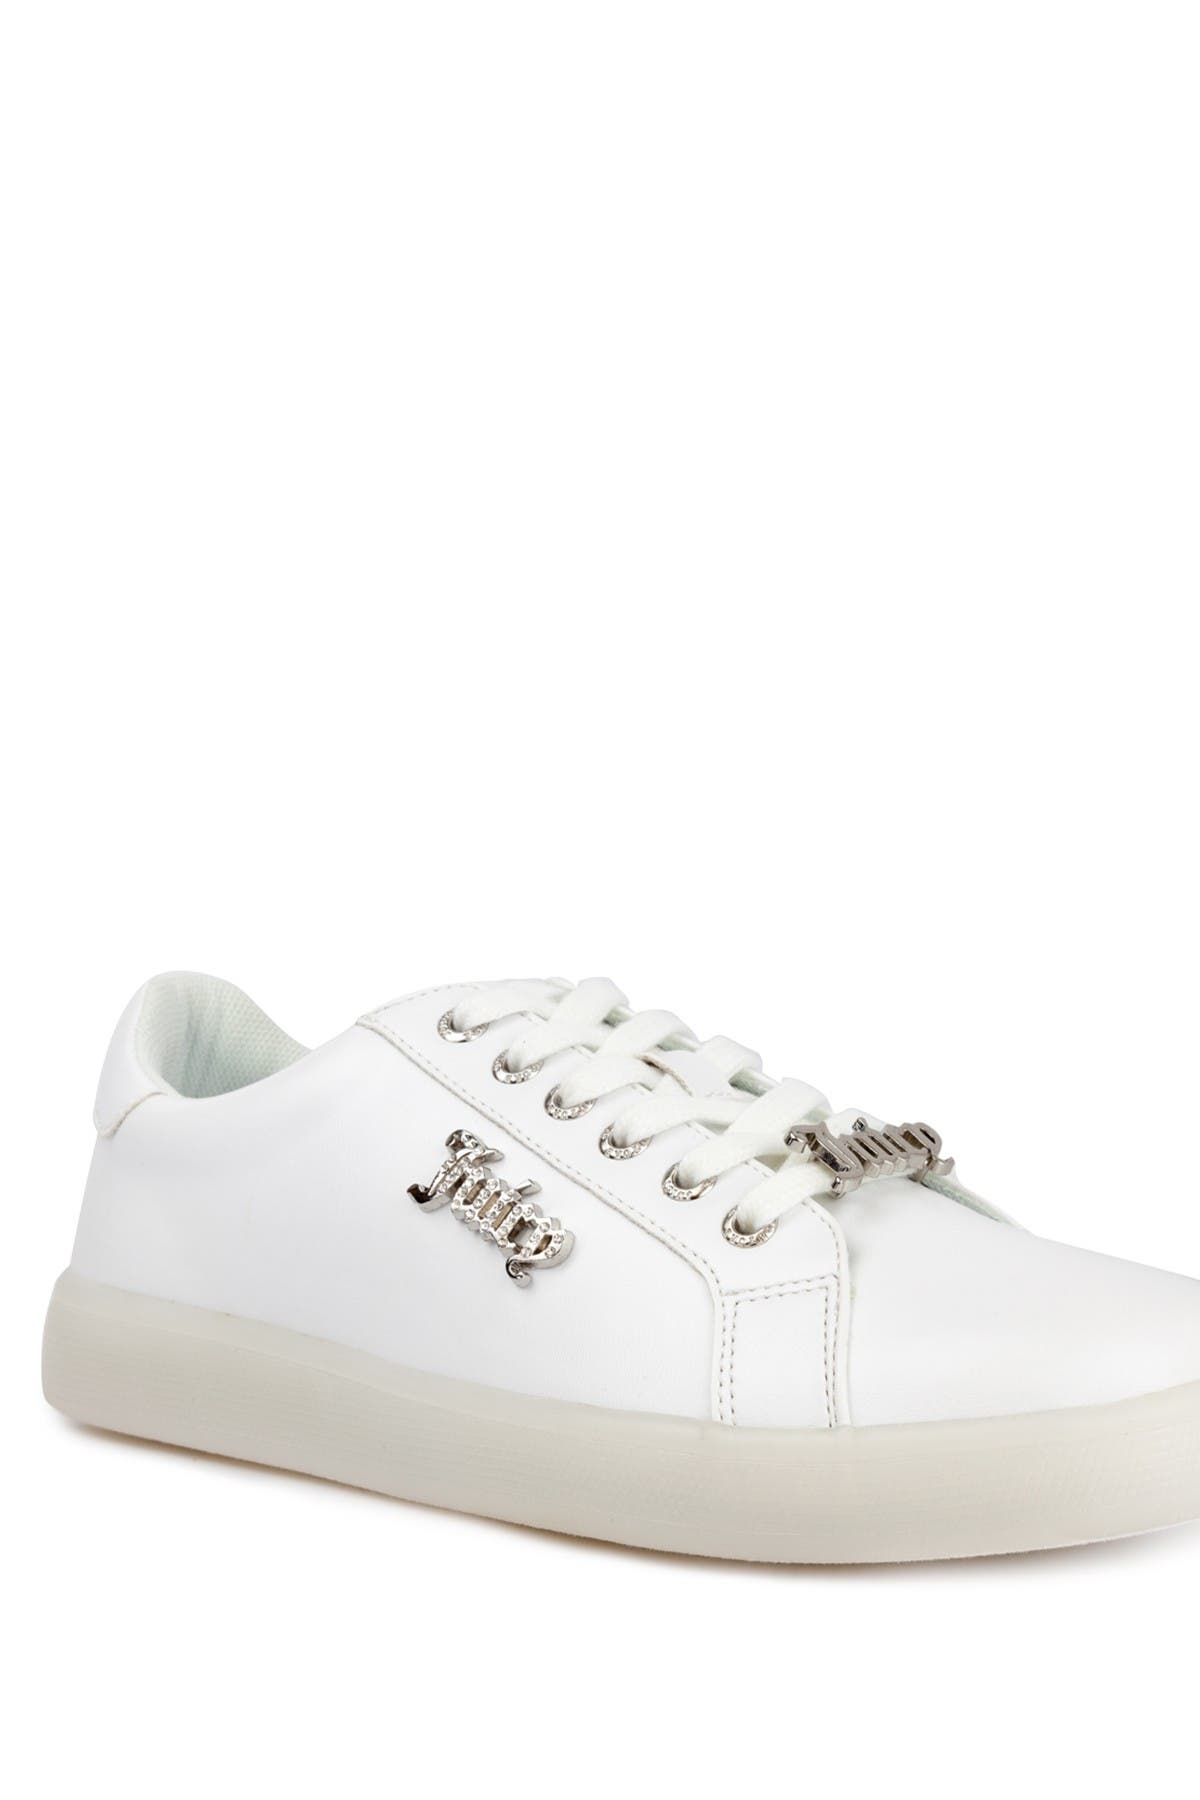 Juicy Couture Connect Fashion Sneaker In White